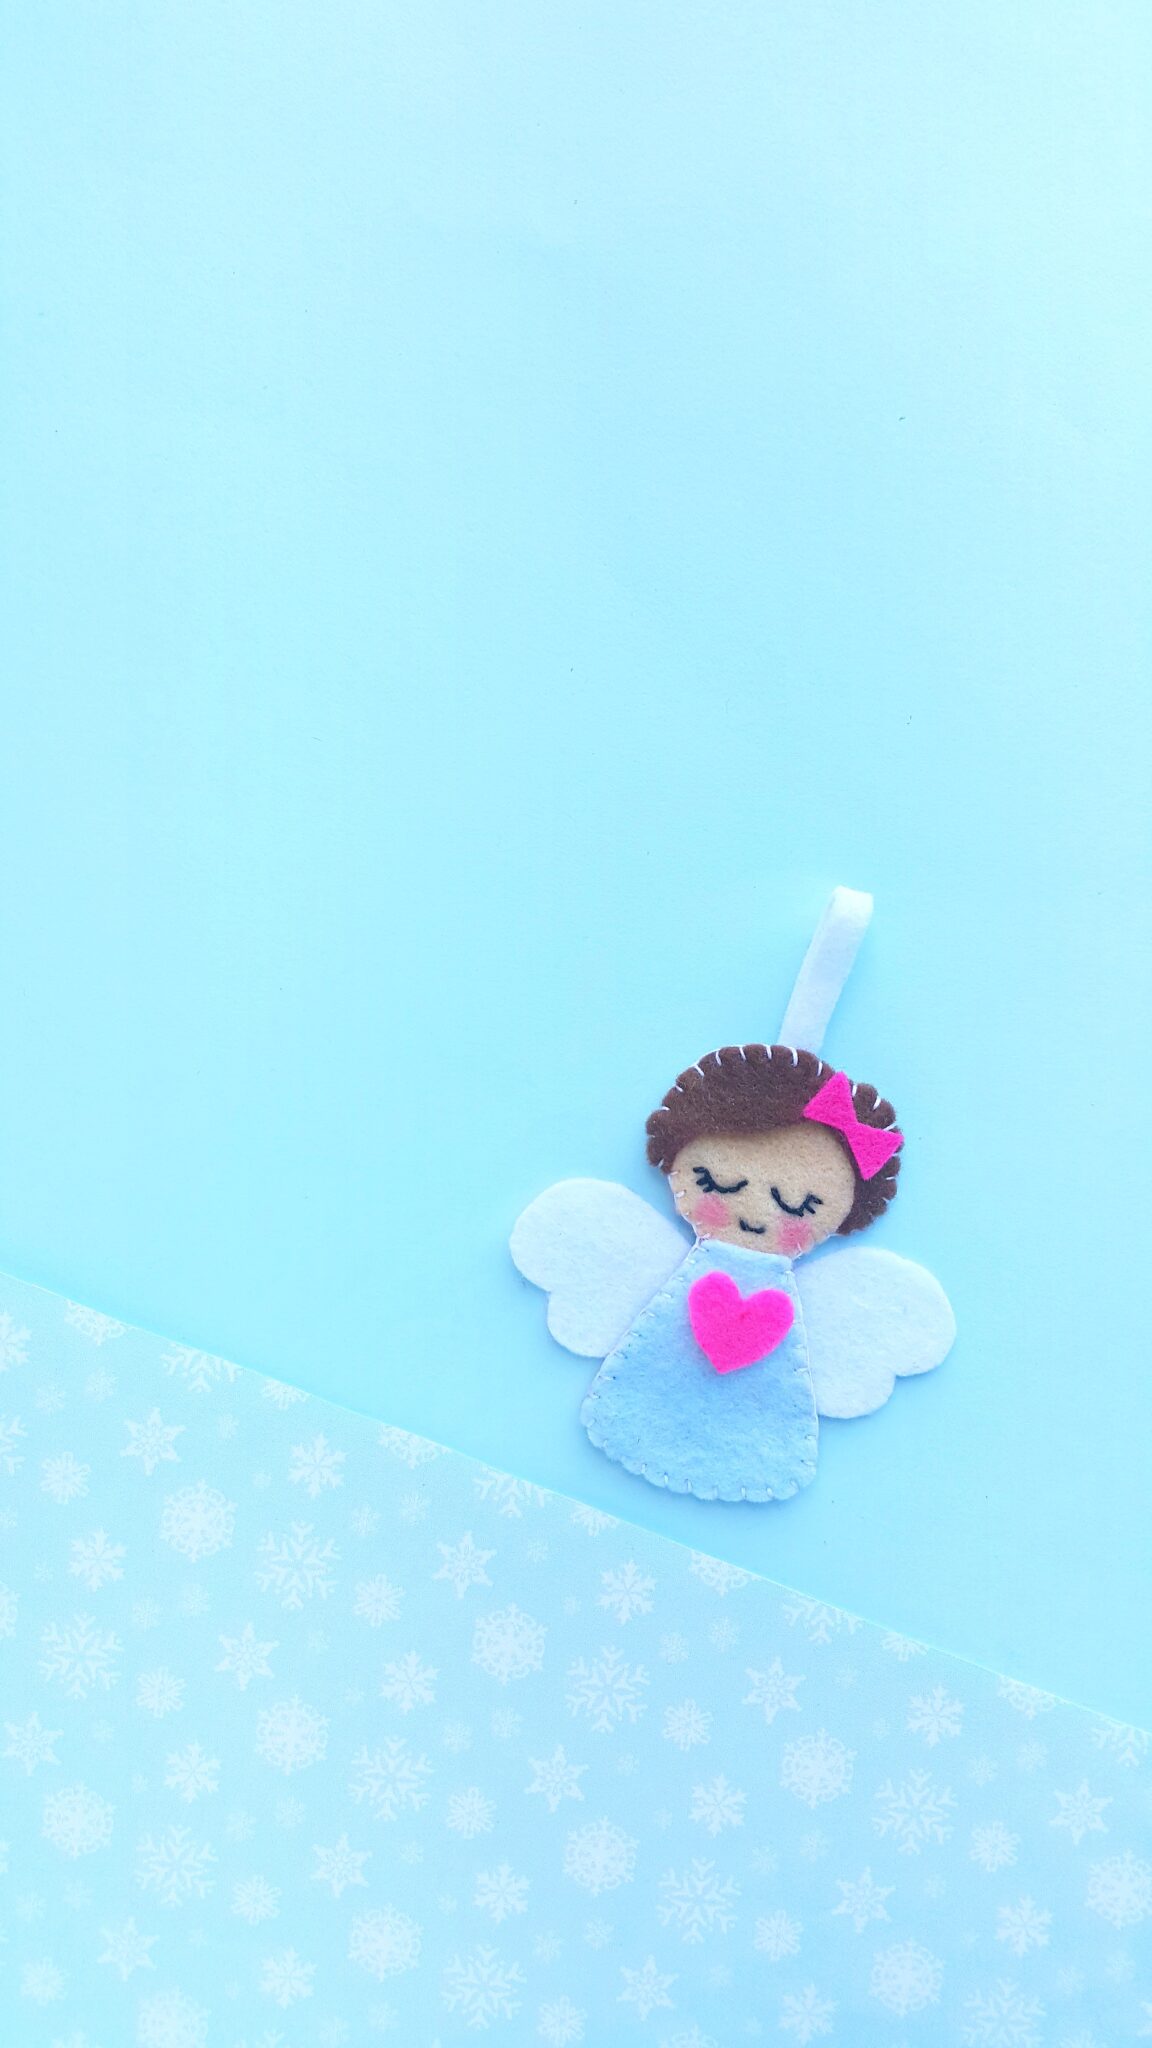 Felt angel with pink heart on dress, brown hair with a pink bow against a blue background.